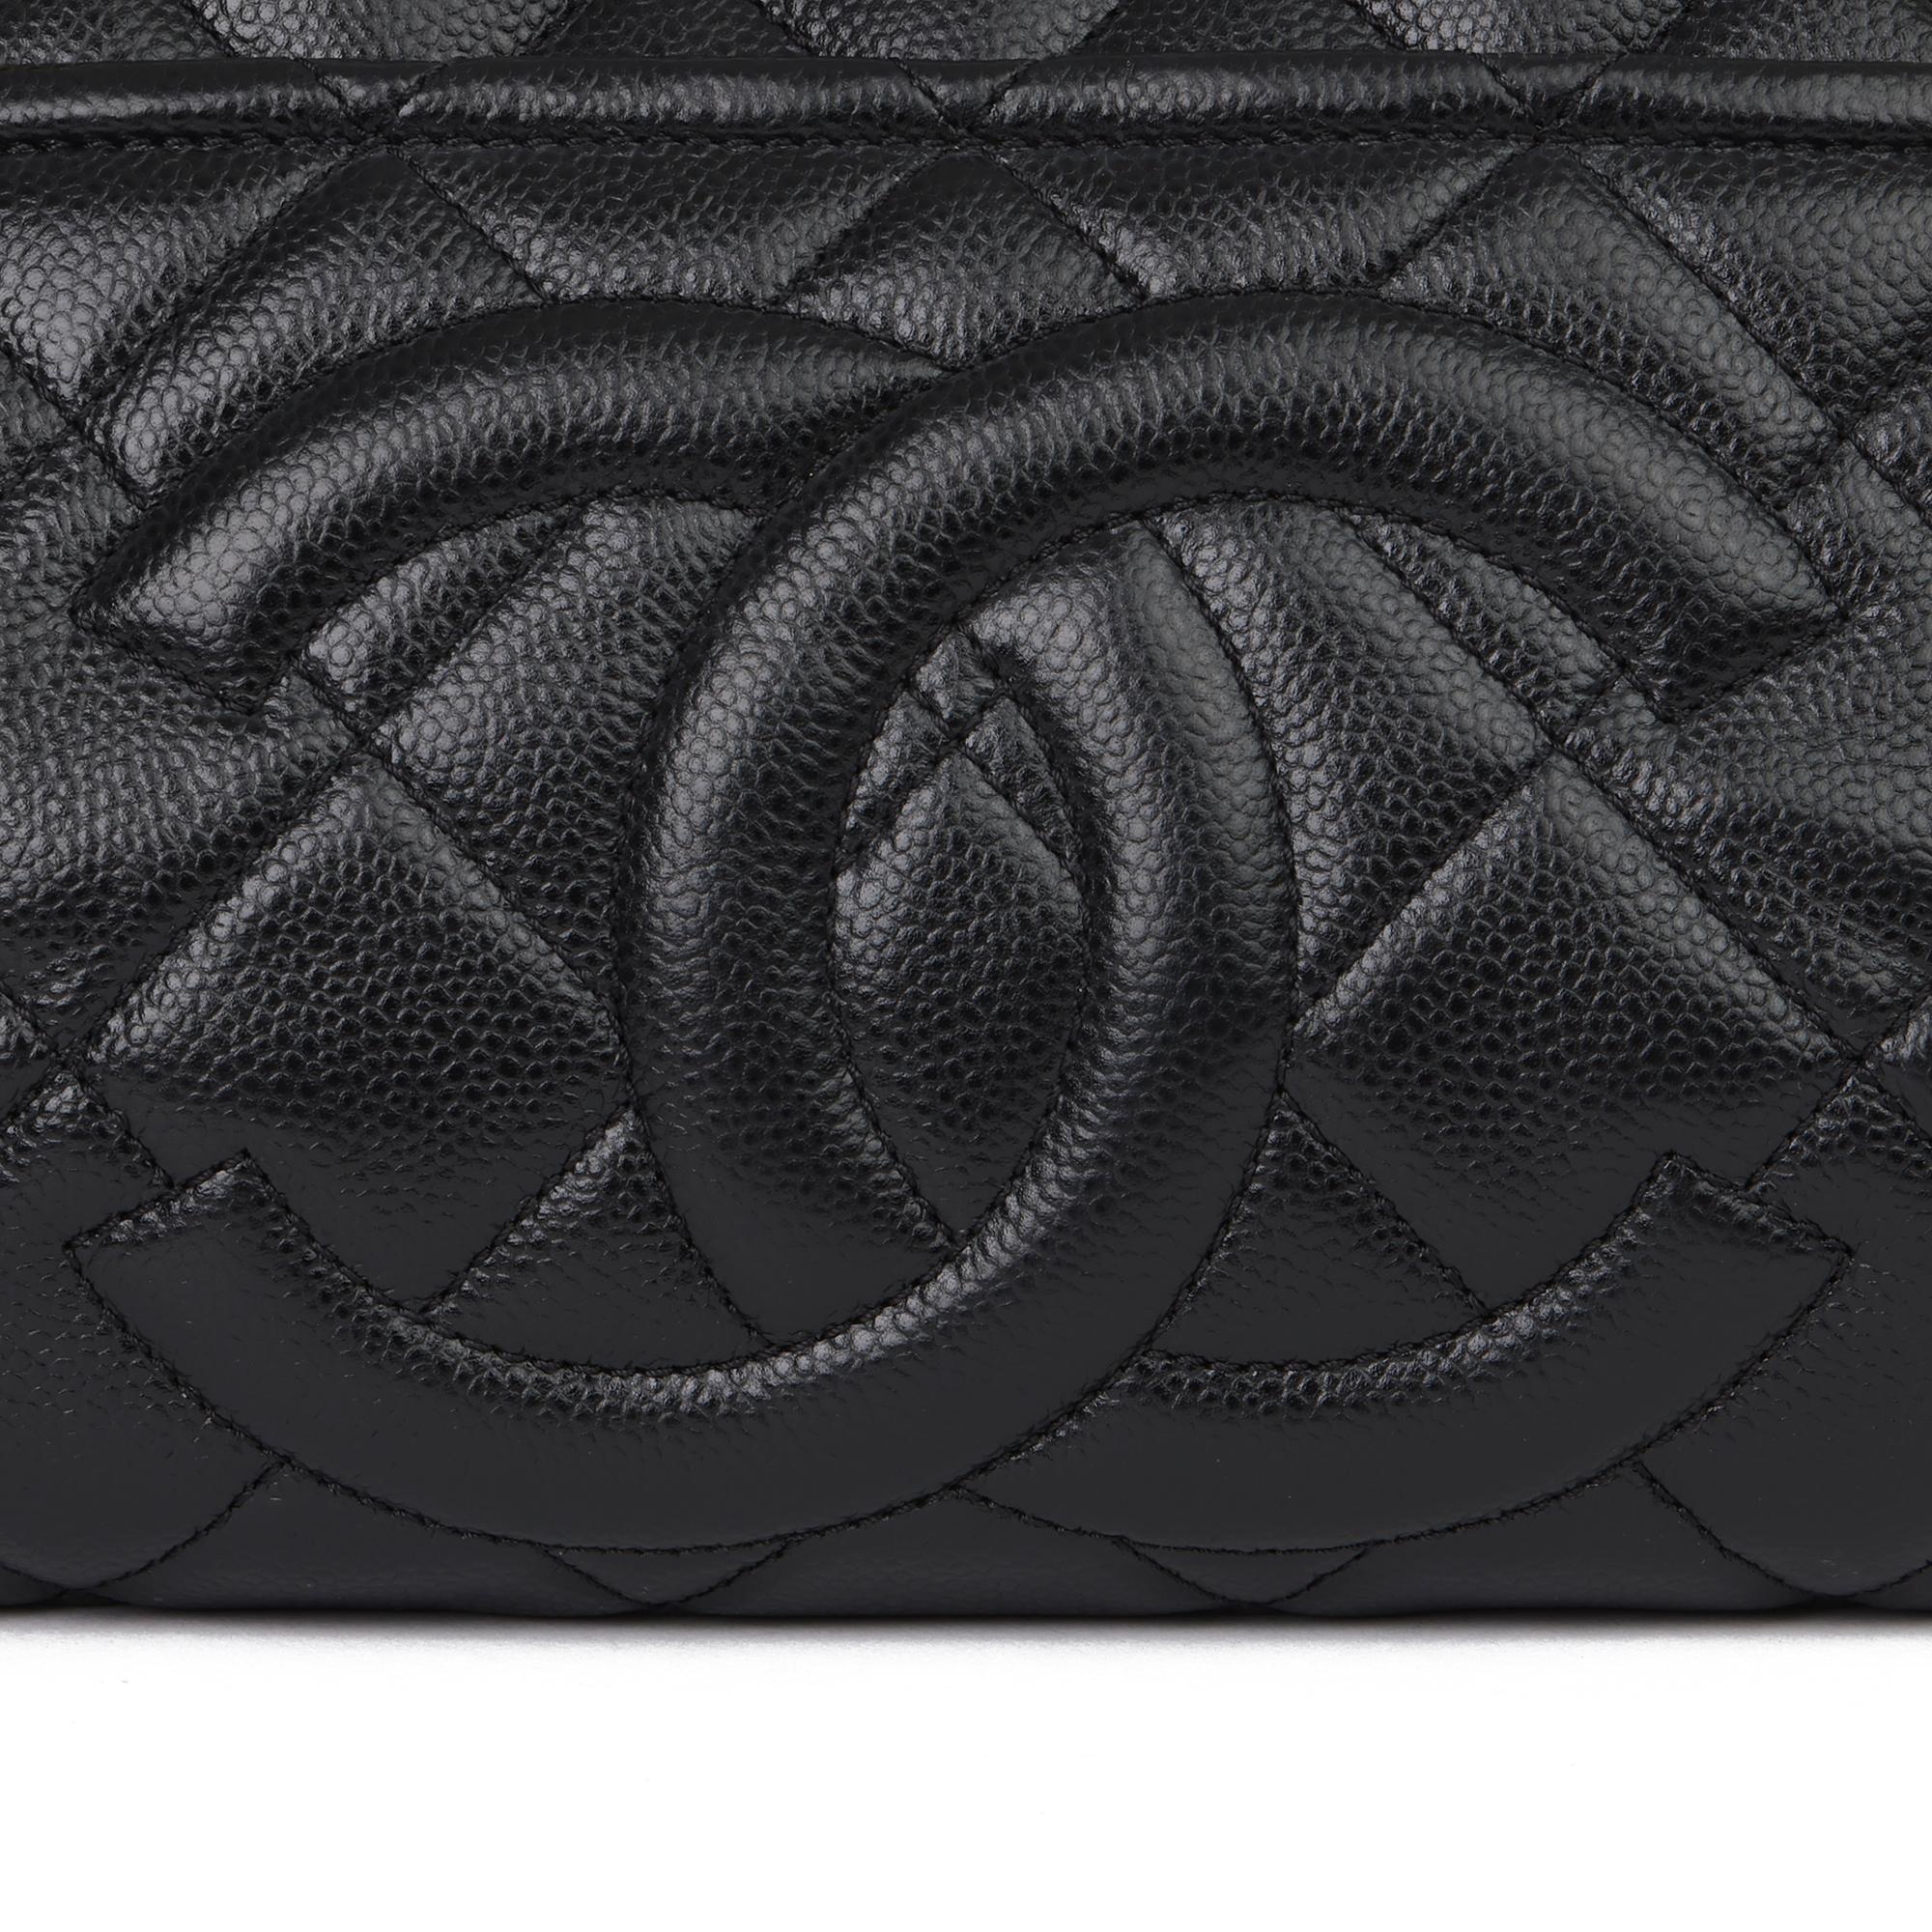 2013 Chanel Black Quilted Caviar Leather Petite Shopping Tote PST 3